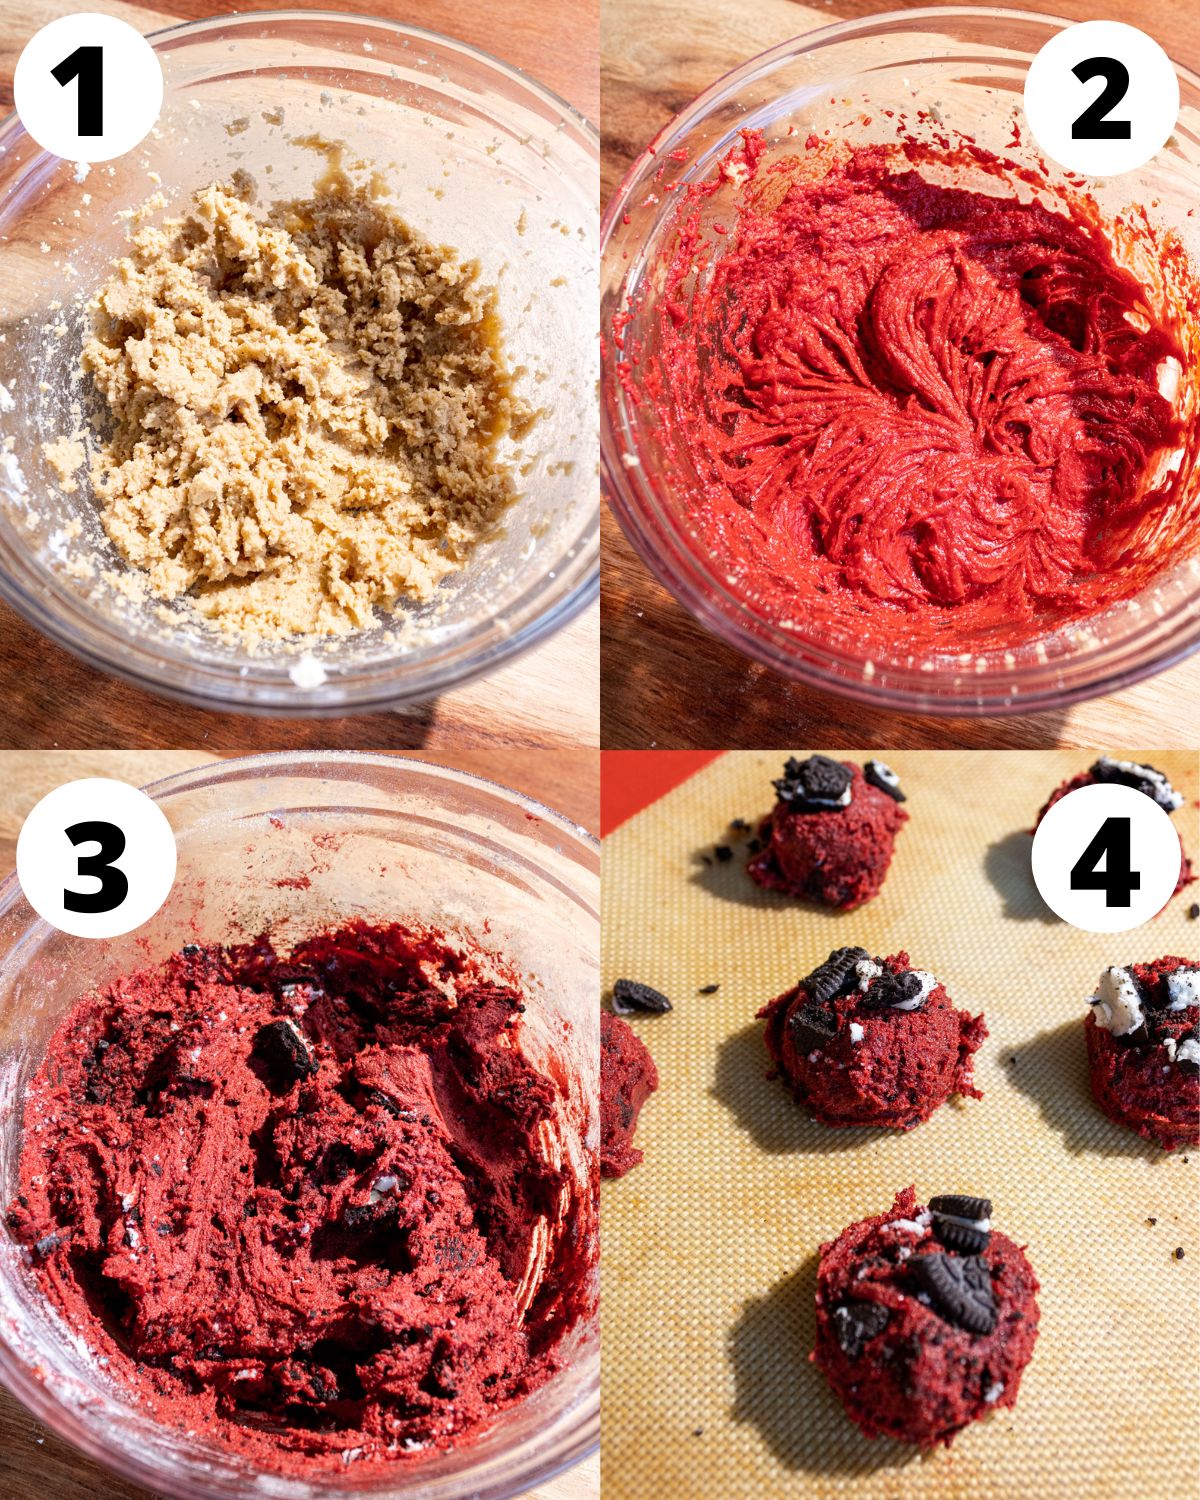 Baking process for Oreo red velvet cookies pictured in four steps